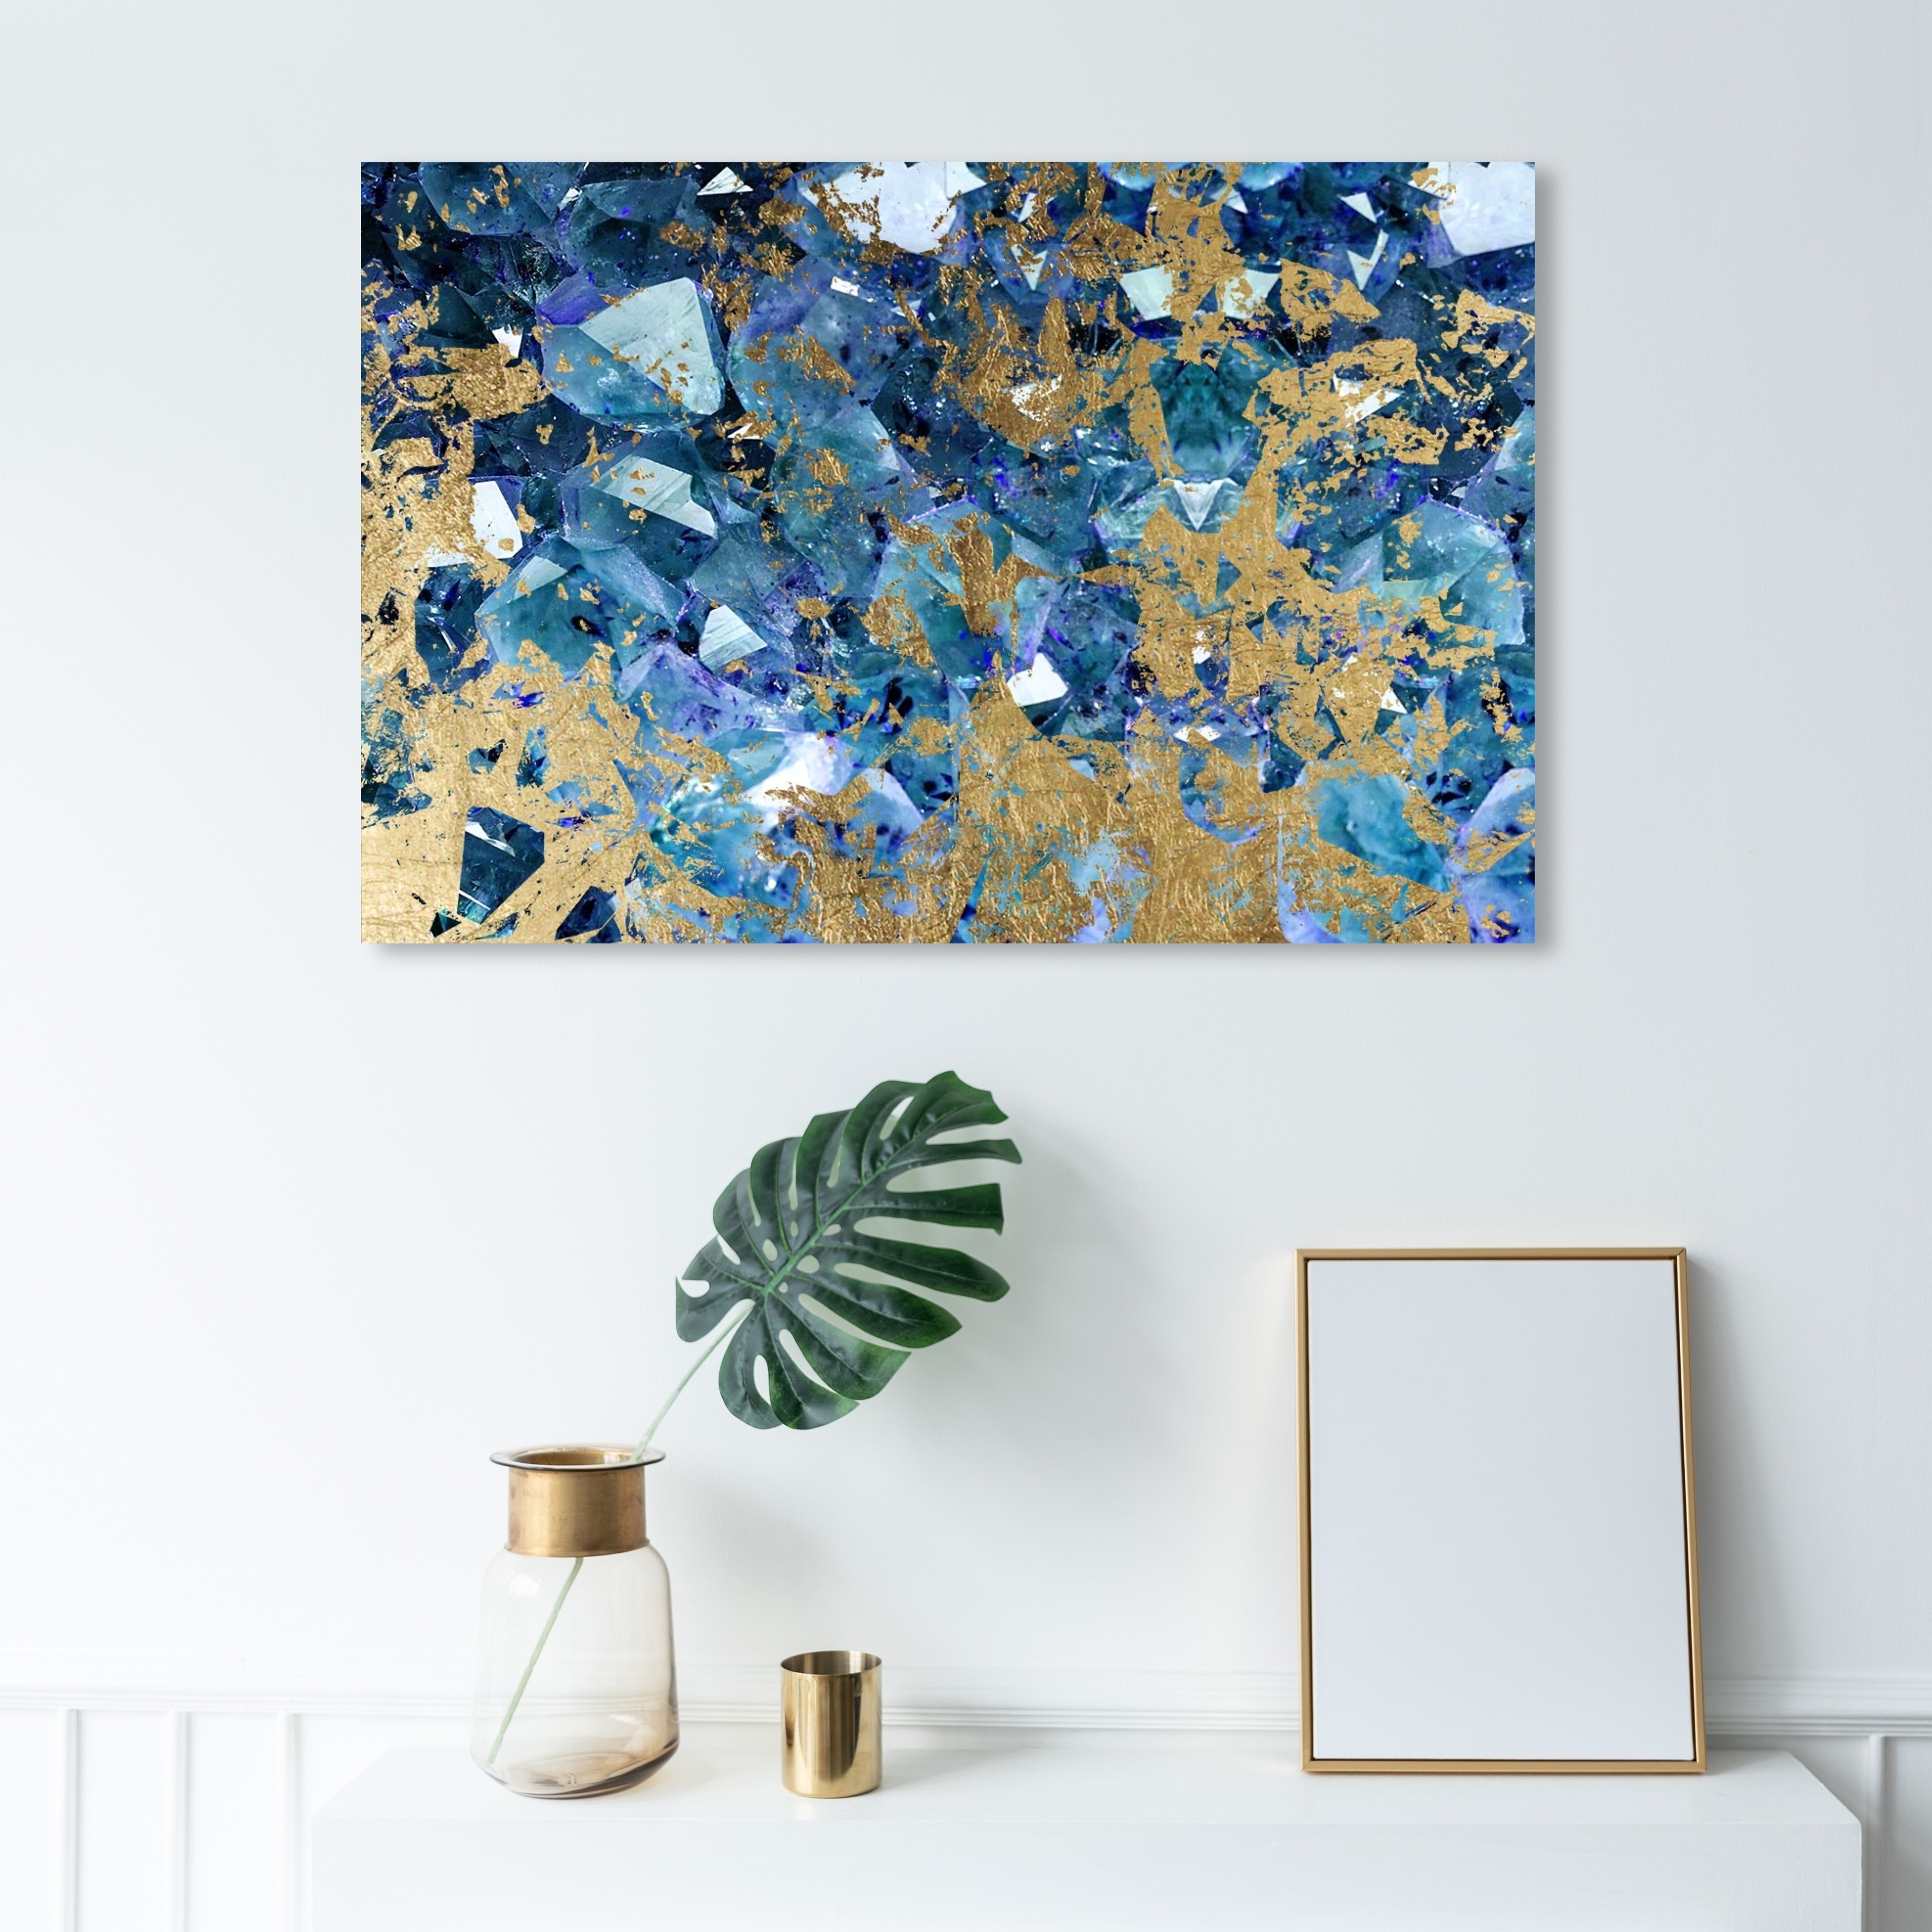 Oliver Gal undefinedCaicosglamundefined Abstract Wall Art Canvas